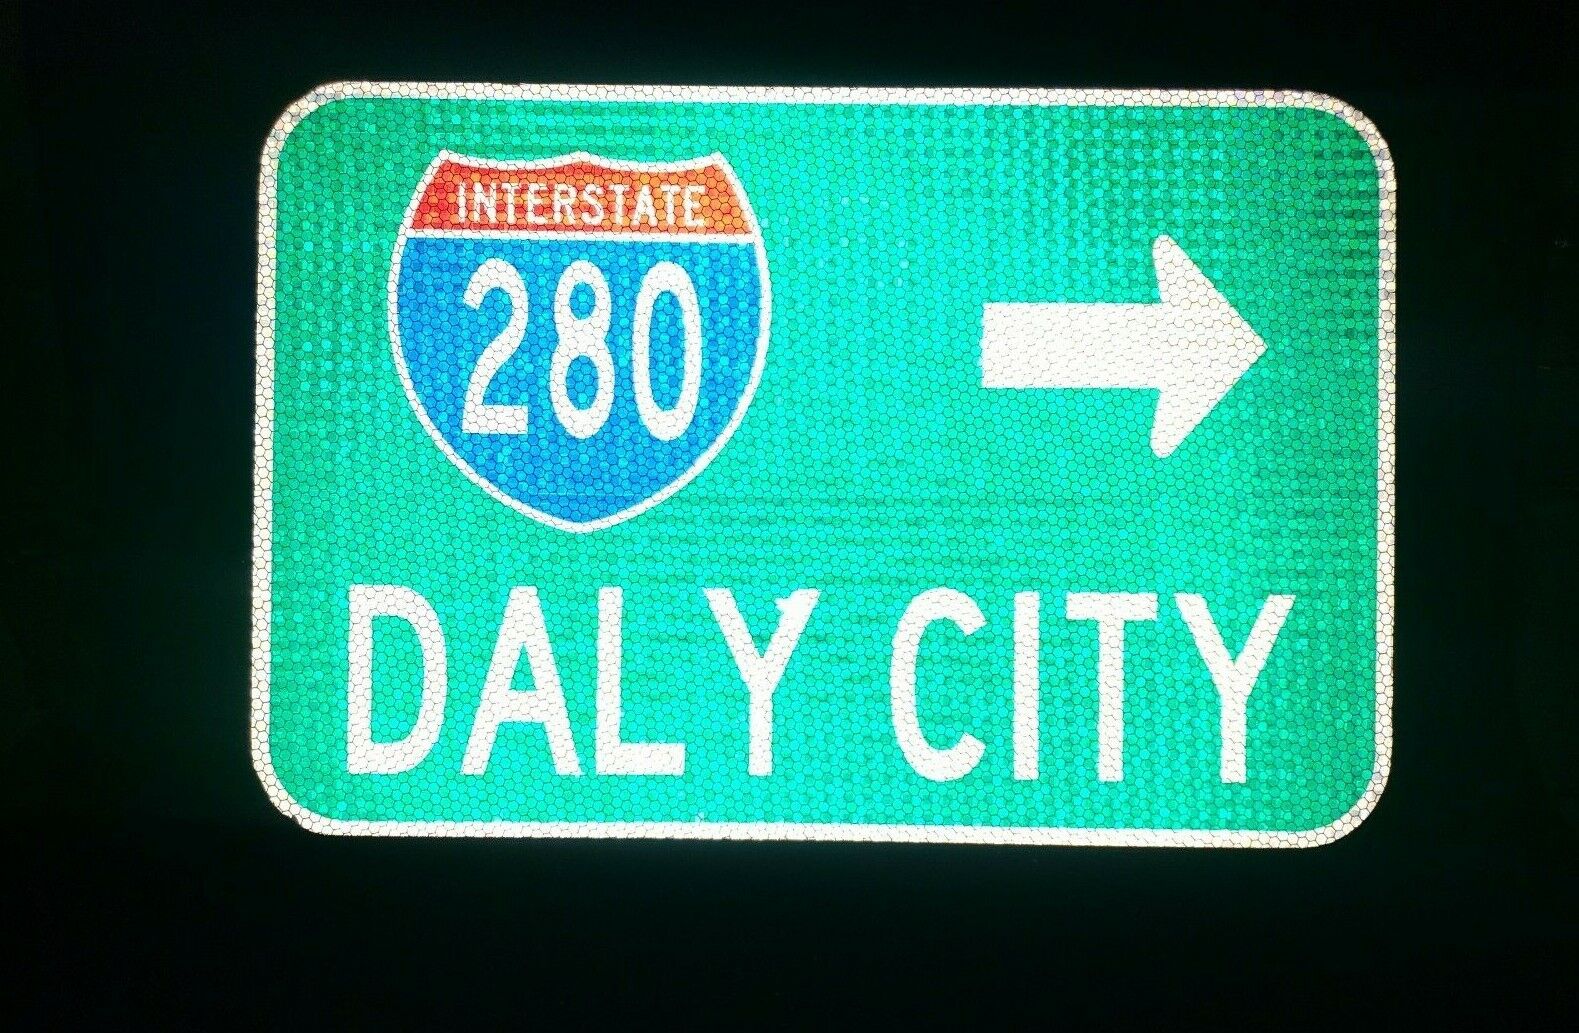 DALY CITY, California route road sign 18